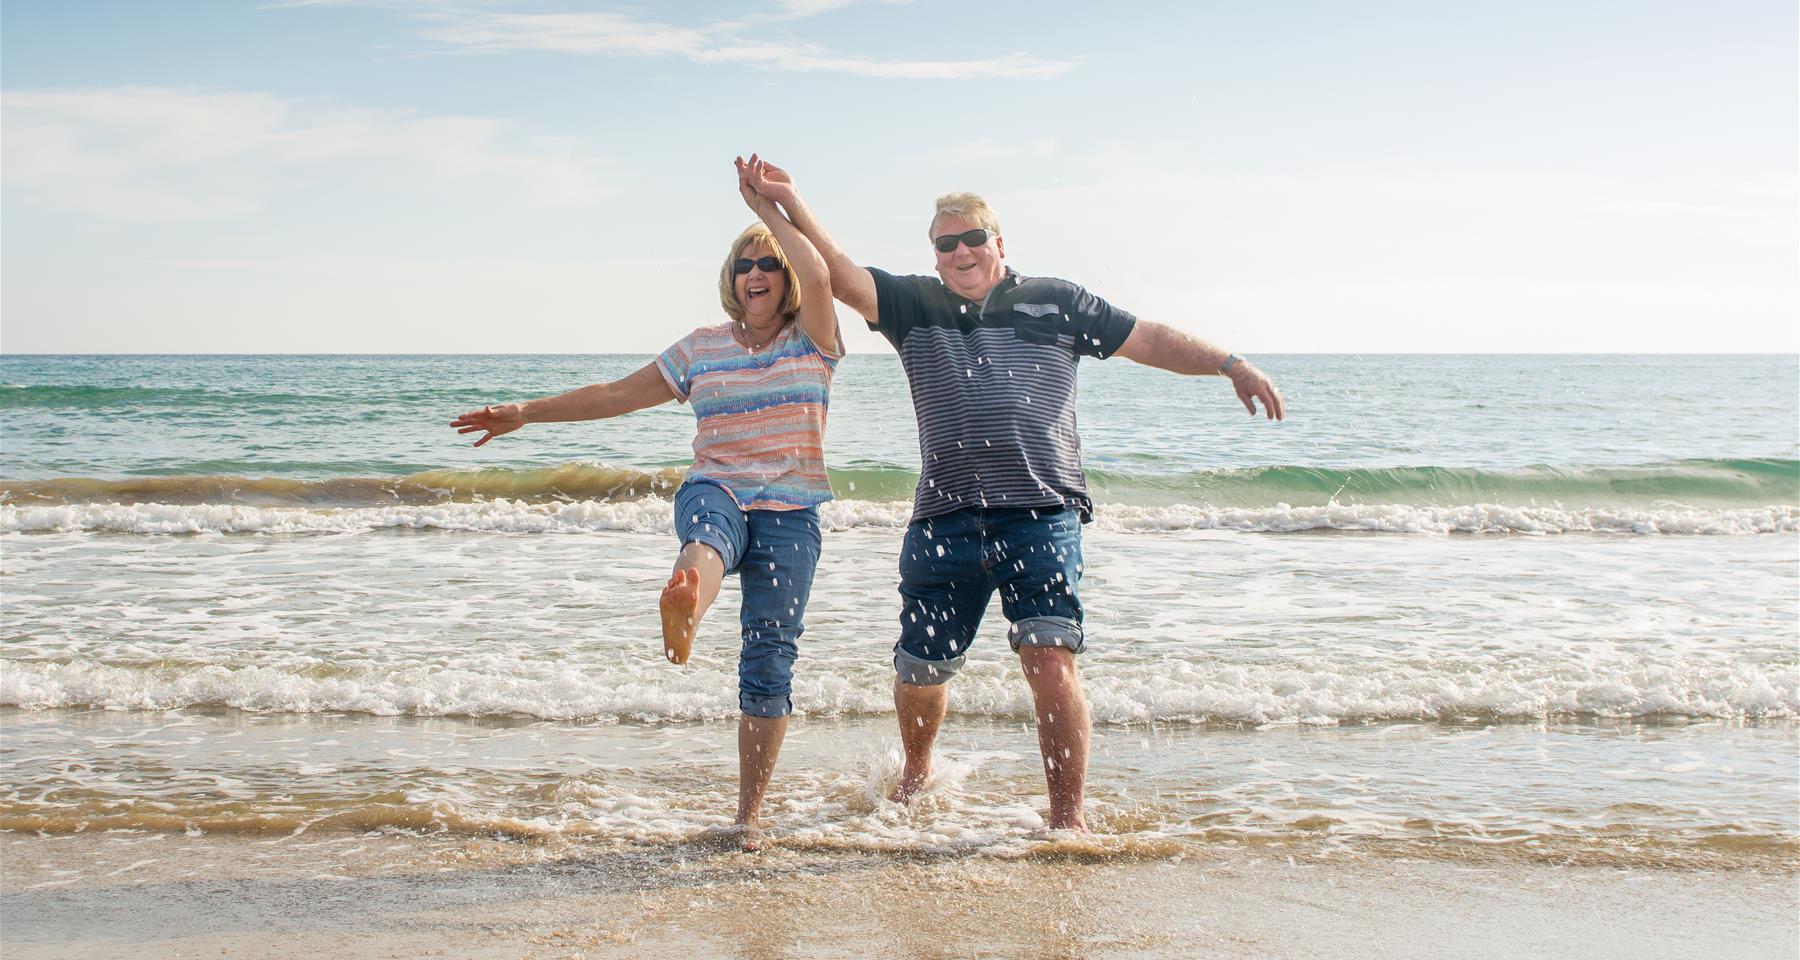 A happy older couple hold hands and kick up their heels in the shallows at a beach